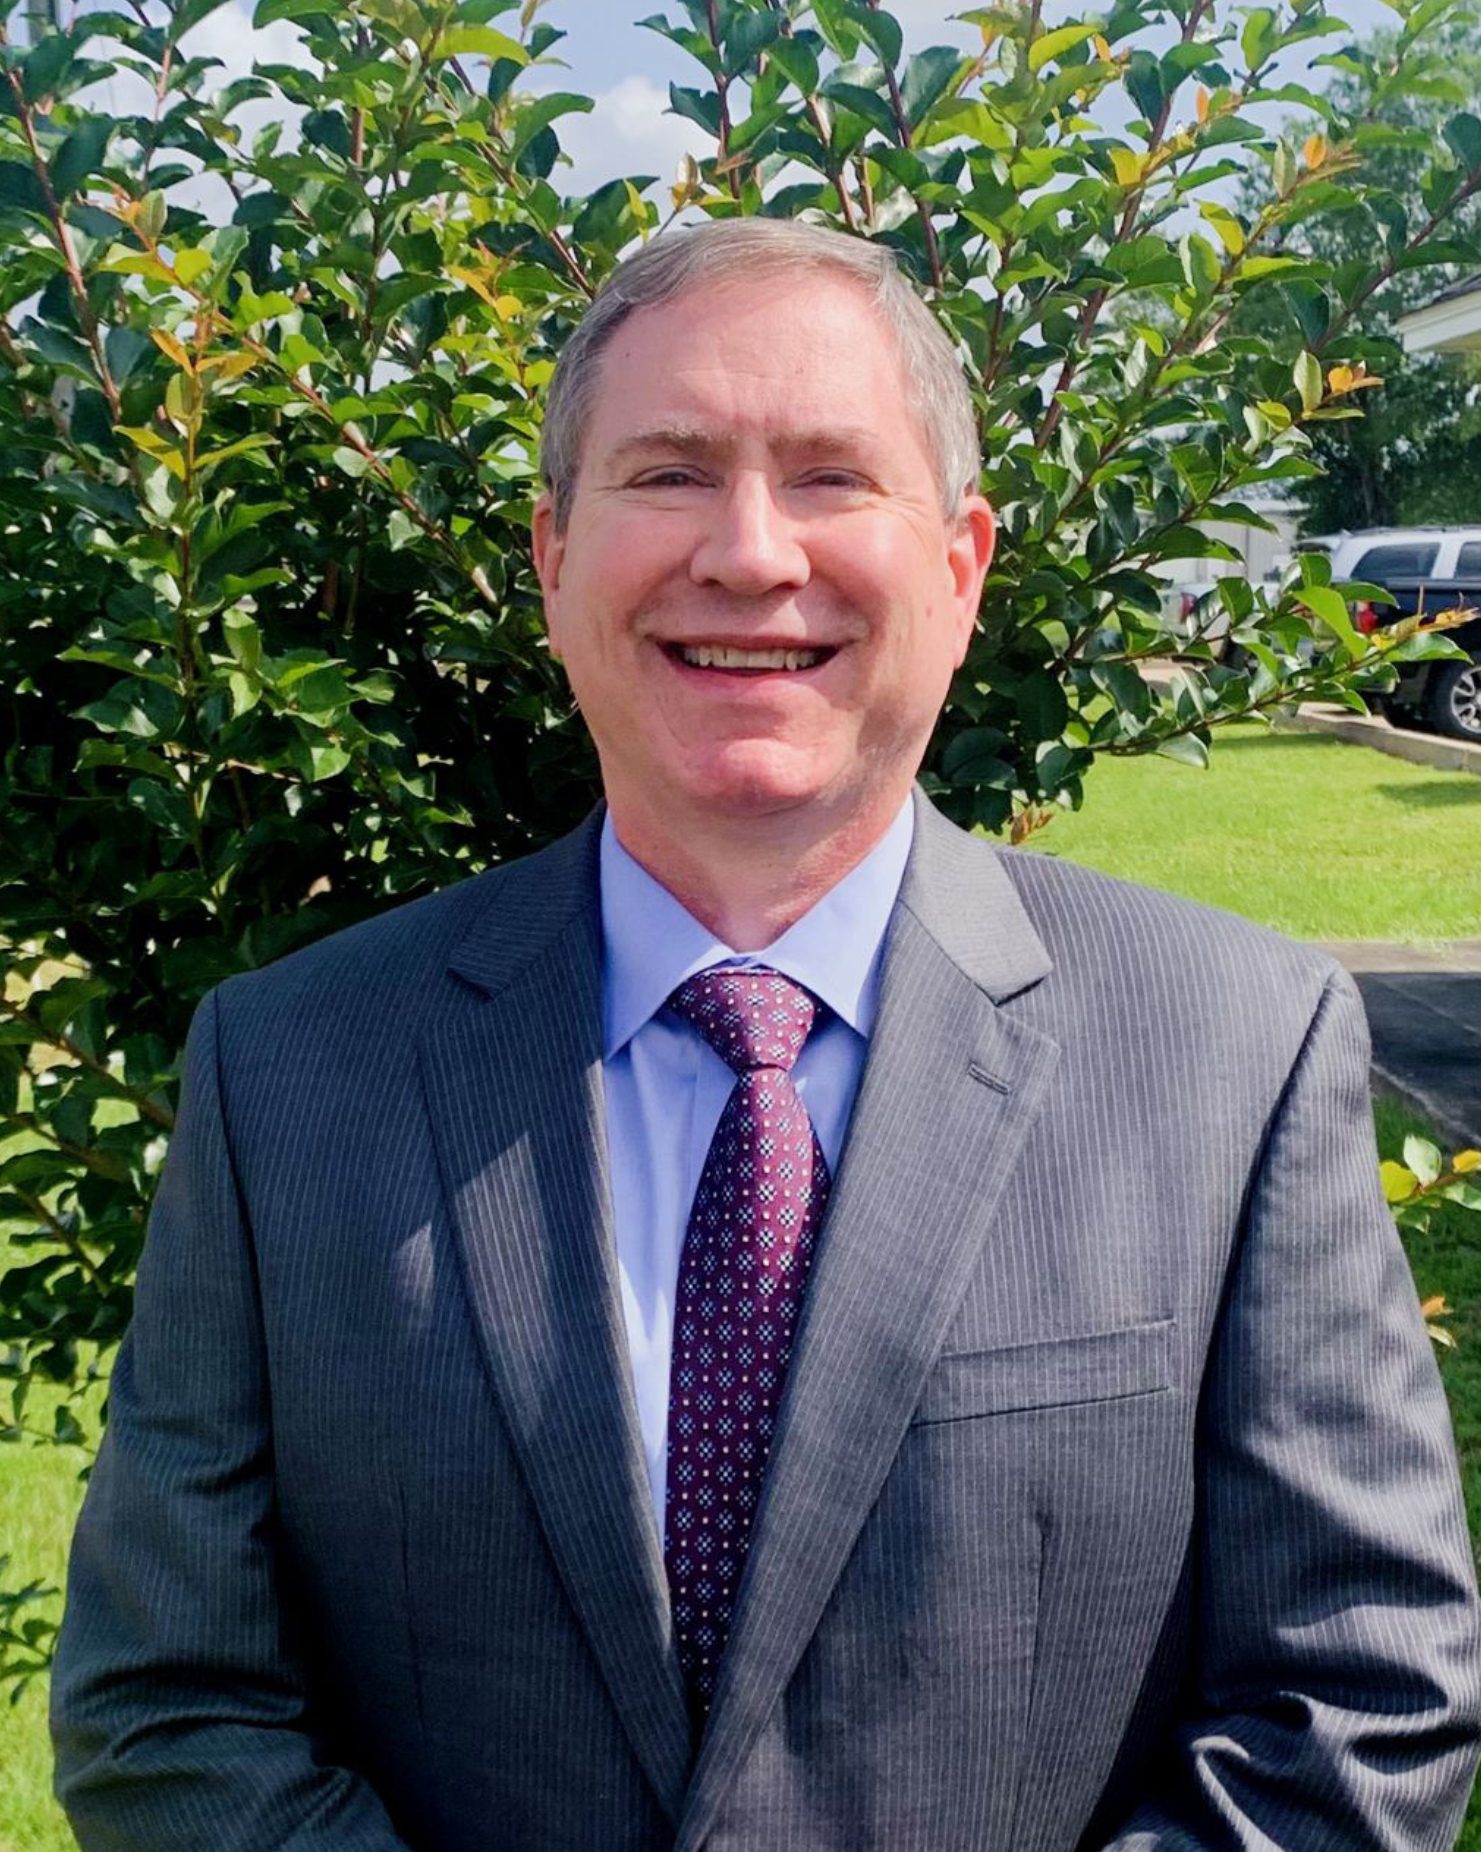 Glenn Rountree is the Methodist Foster Care Recruiter for Monroe and Northeast Louisiana.